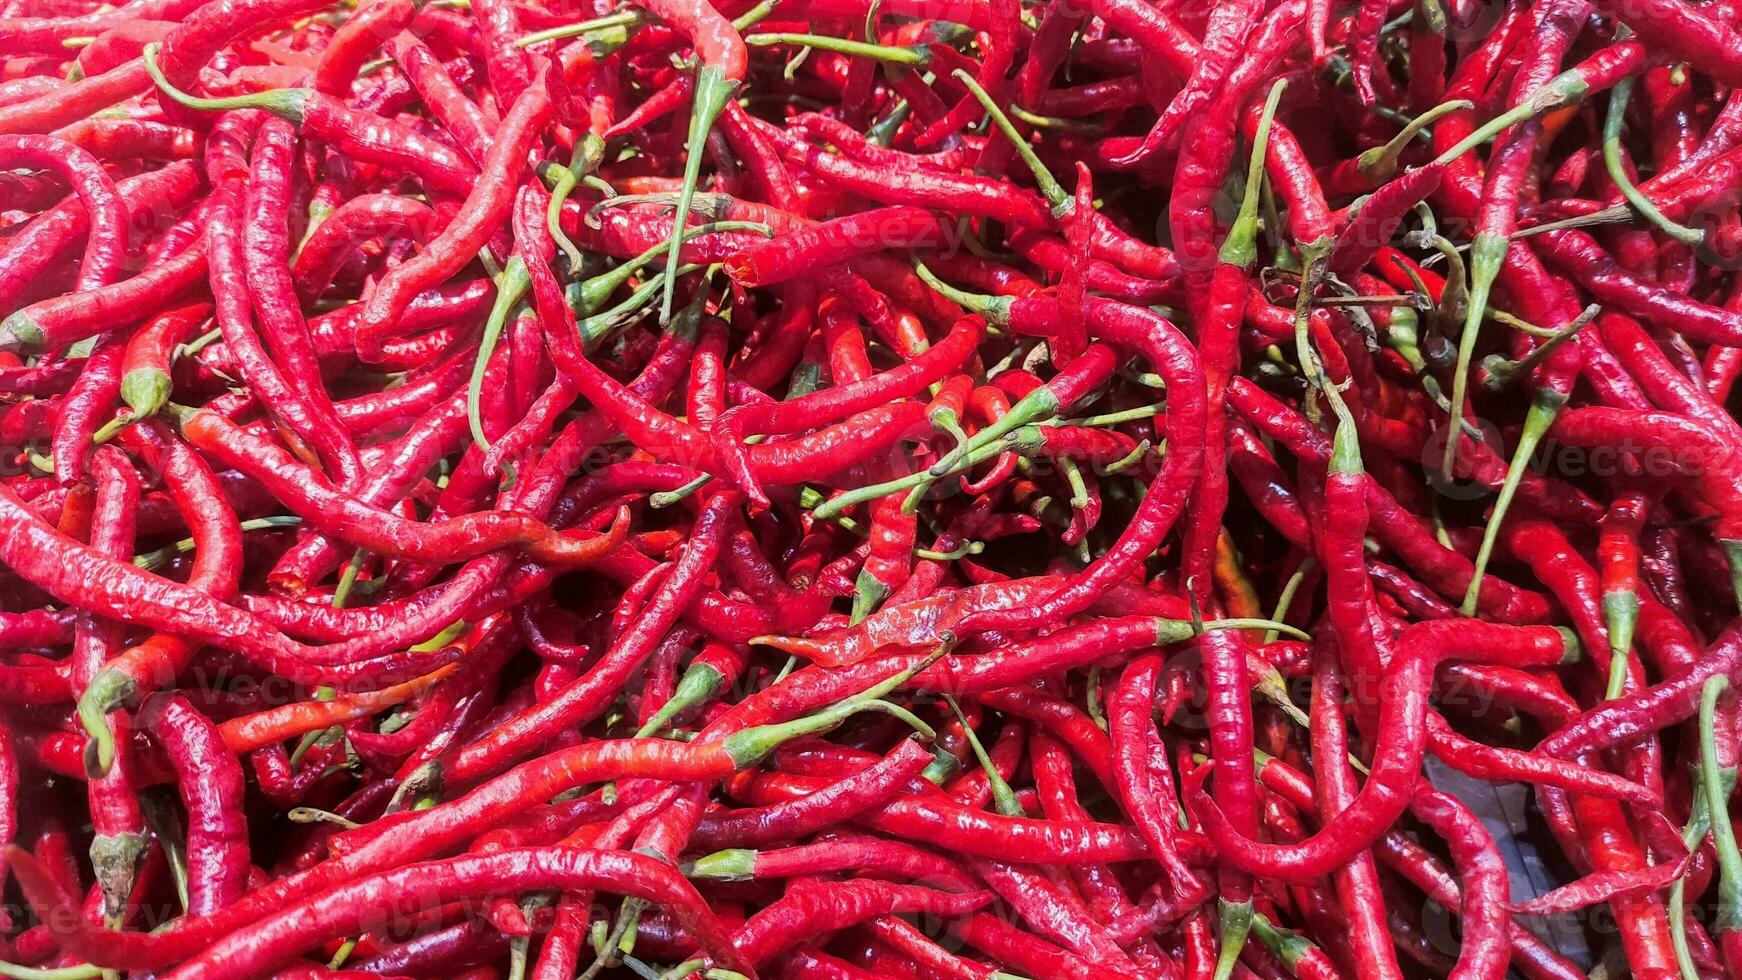 pile of chilies on market photo